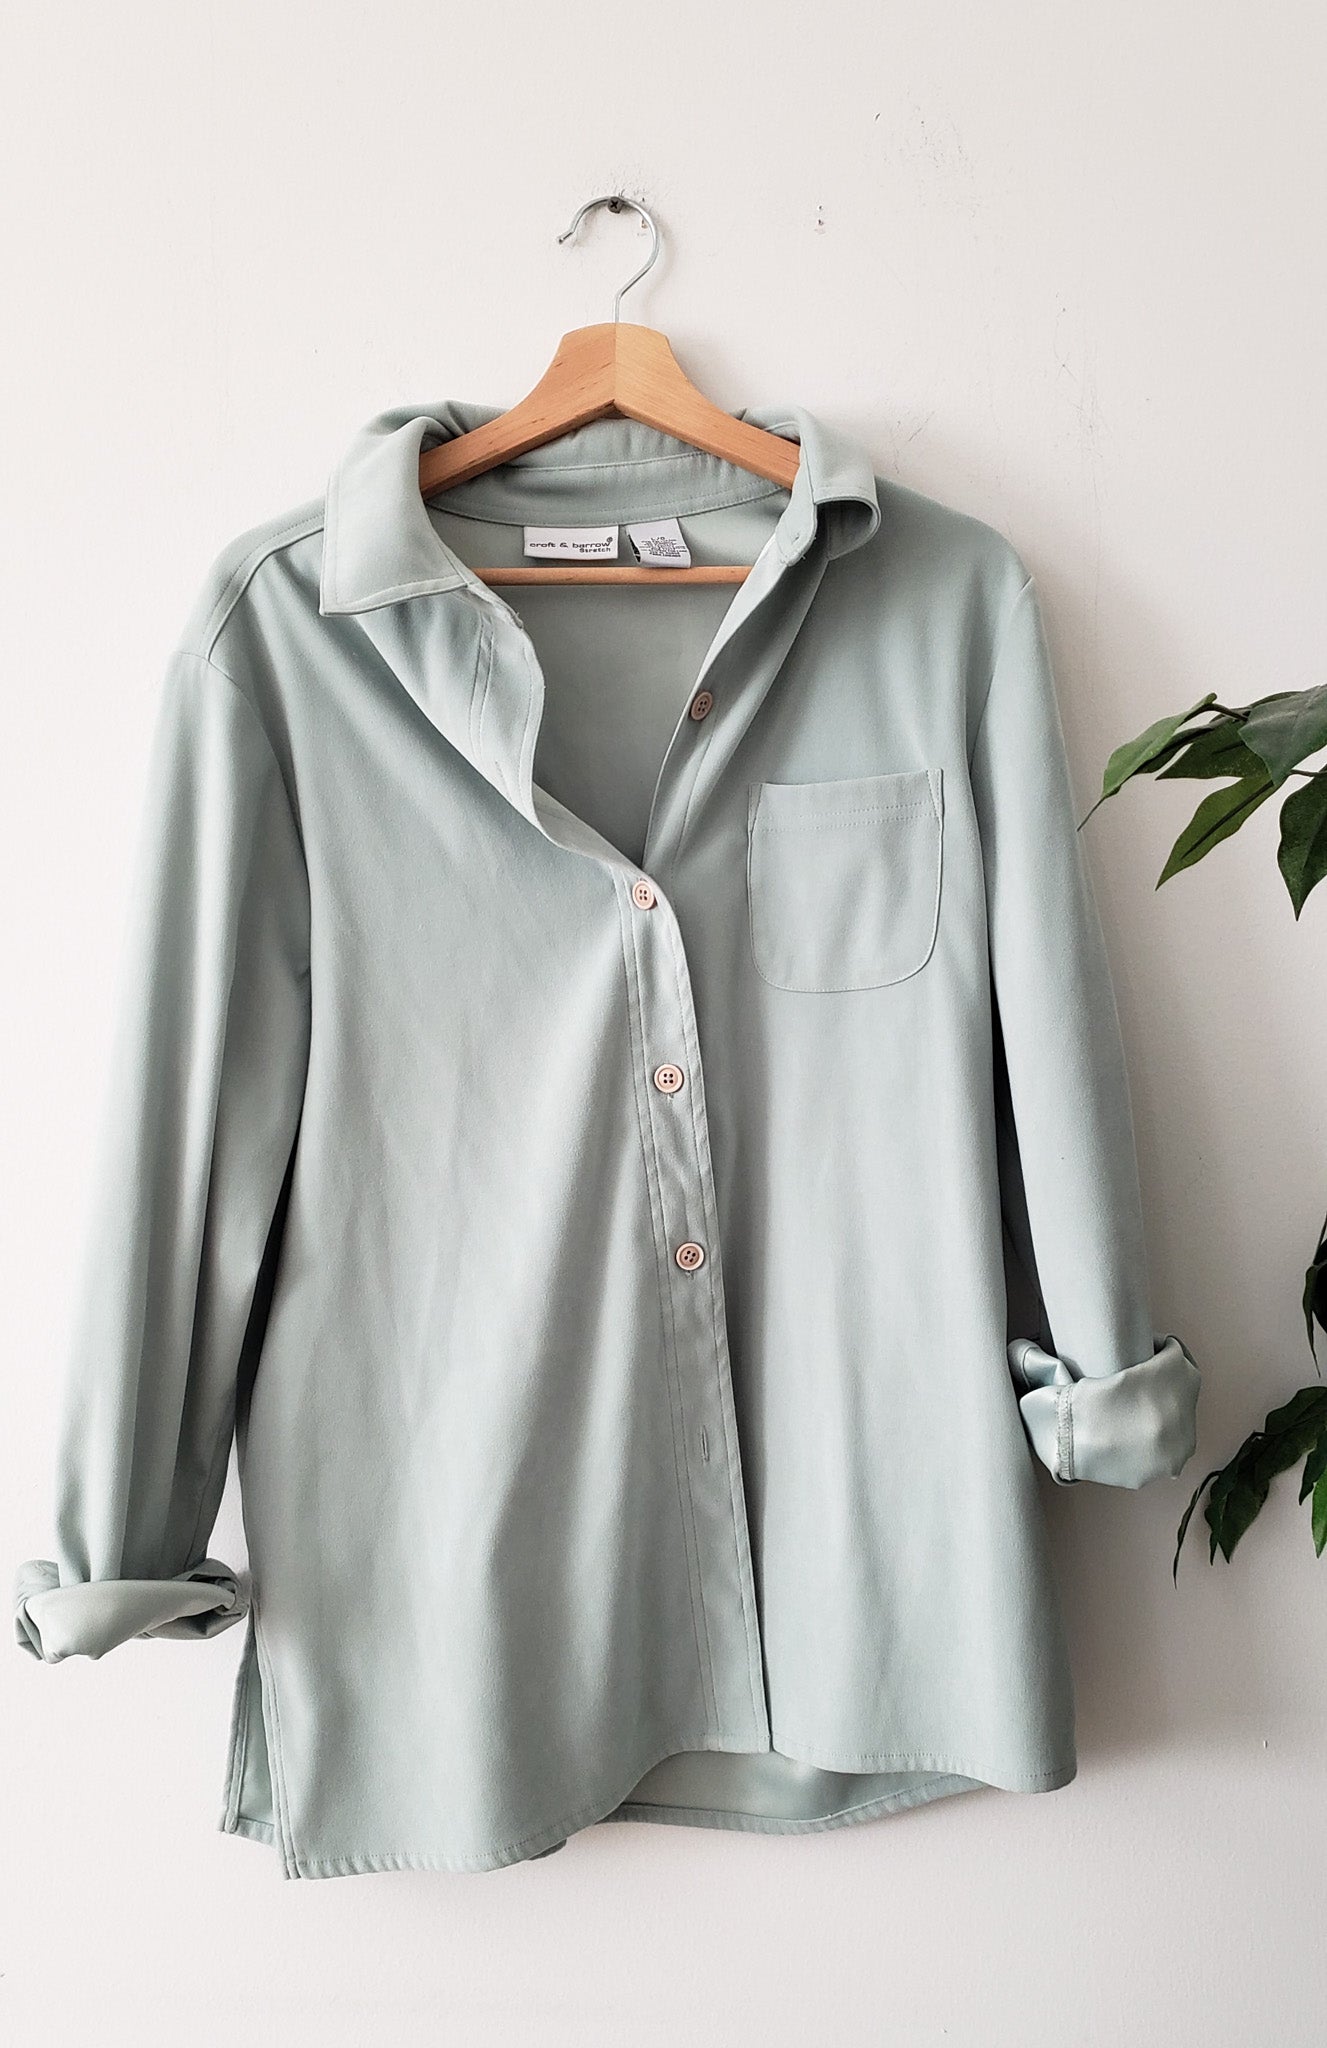 CROFT & BARROW SAGE GREEN BUTTON-UP SIZE LARGE